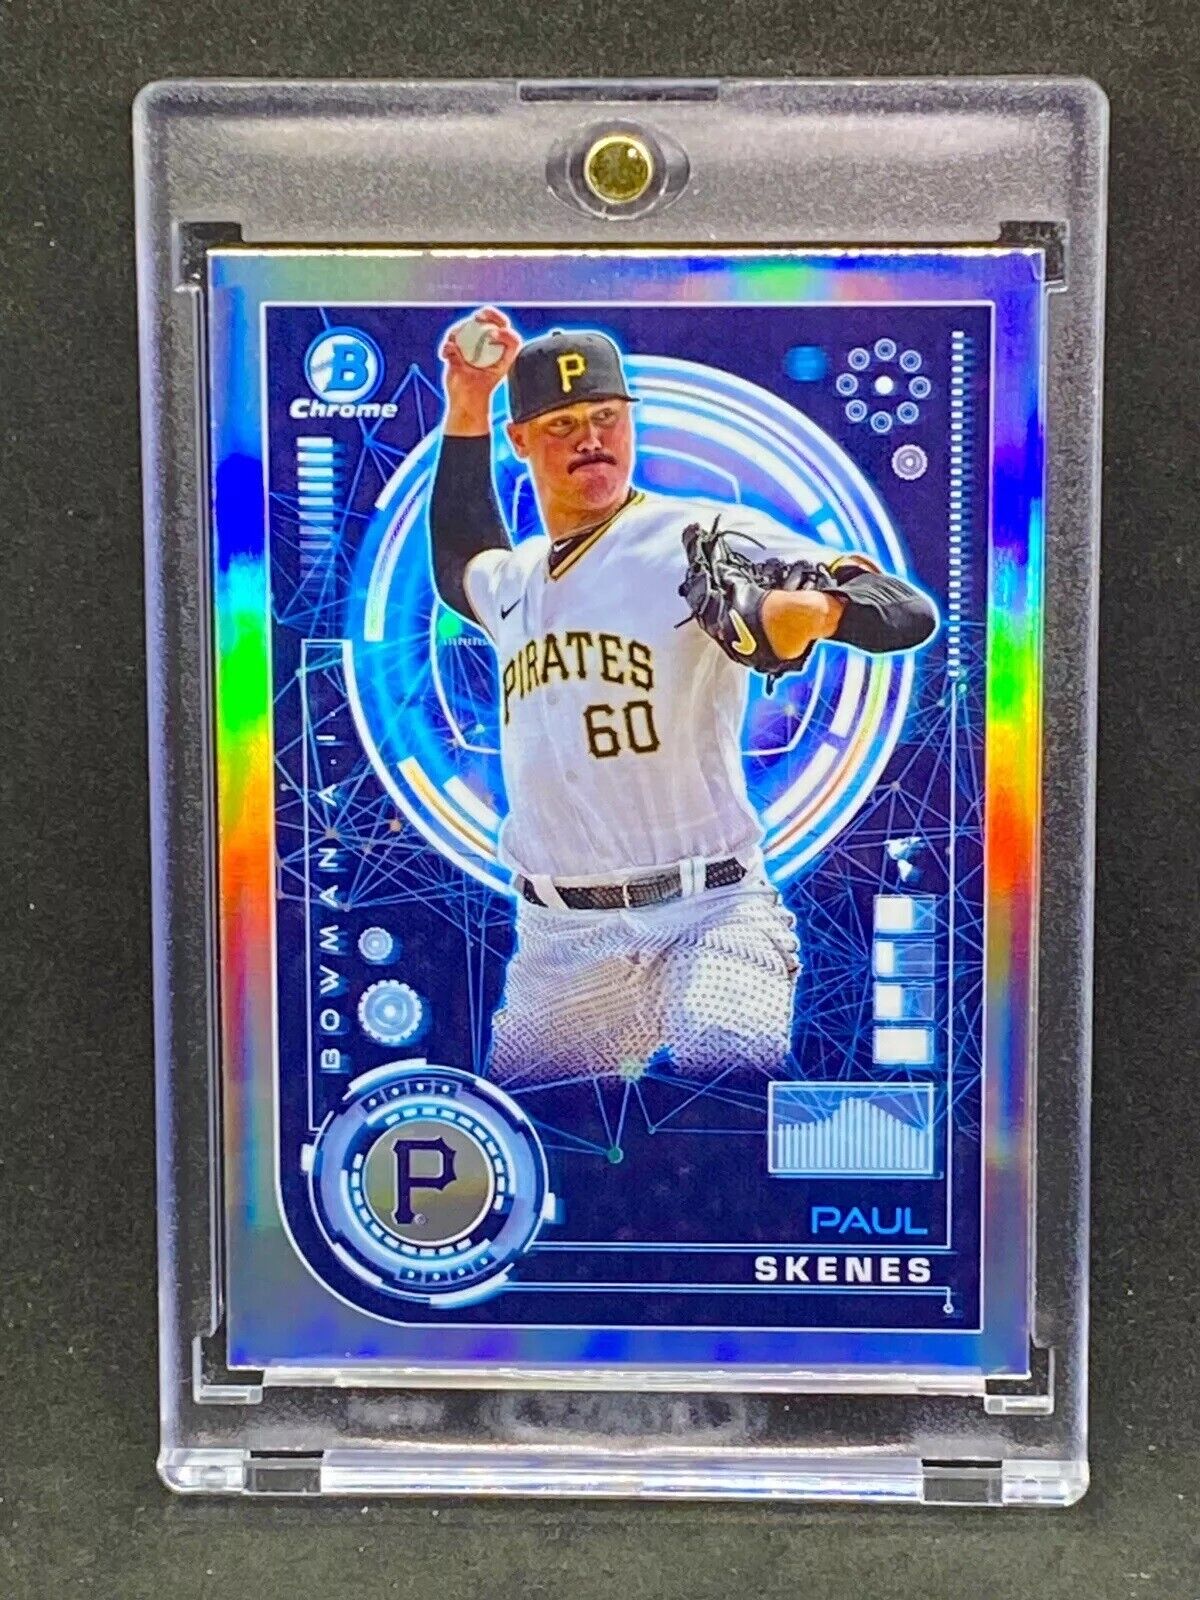 Paul Skenes RARE ROOKIE RC REFRACTOR BOWMAN CHROME INVESTMENT CARD PIRATES